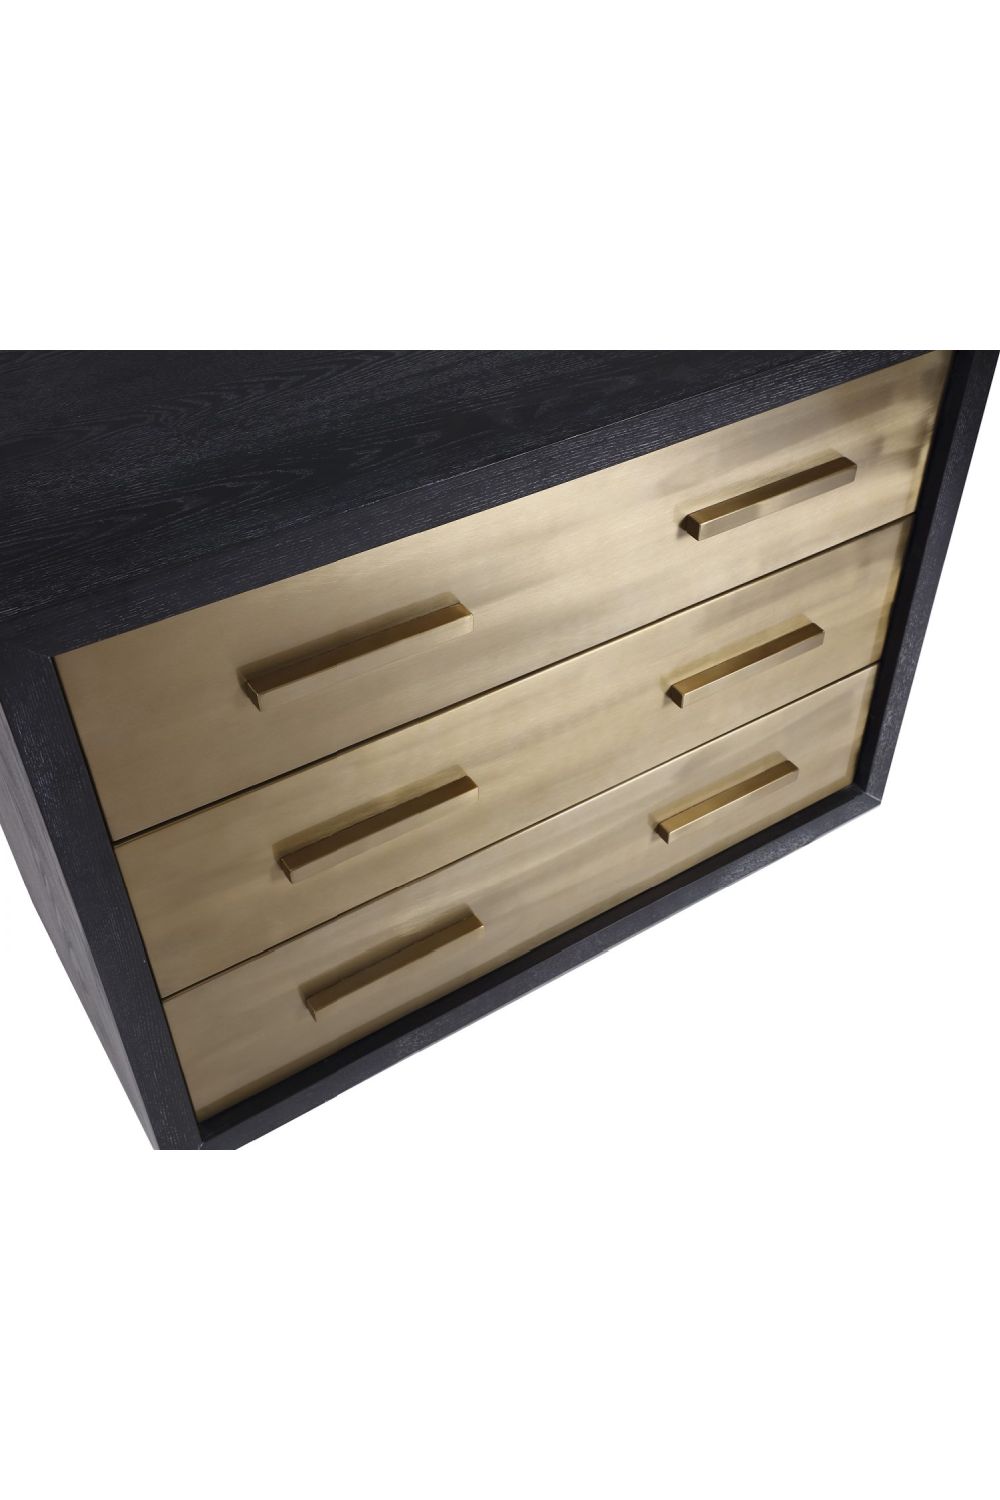 Brown Industrial Chest of Drawers | Liang & Eimil Camden | OROA.com